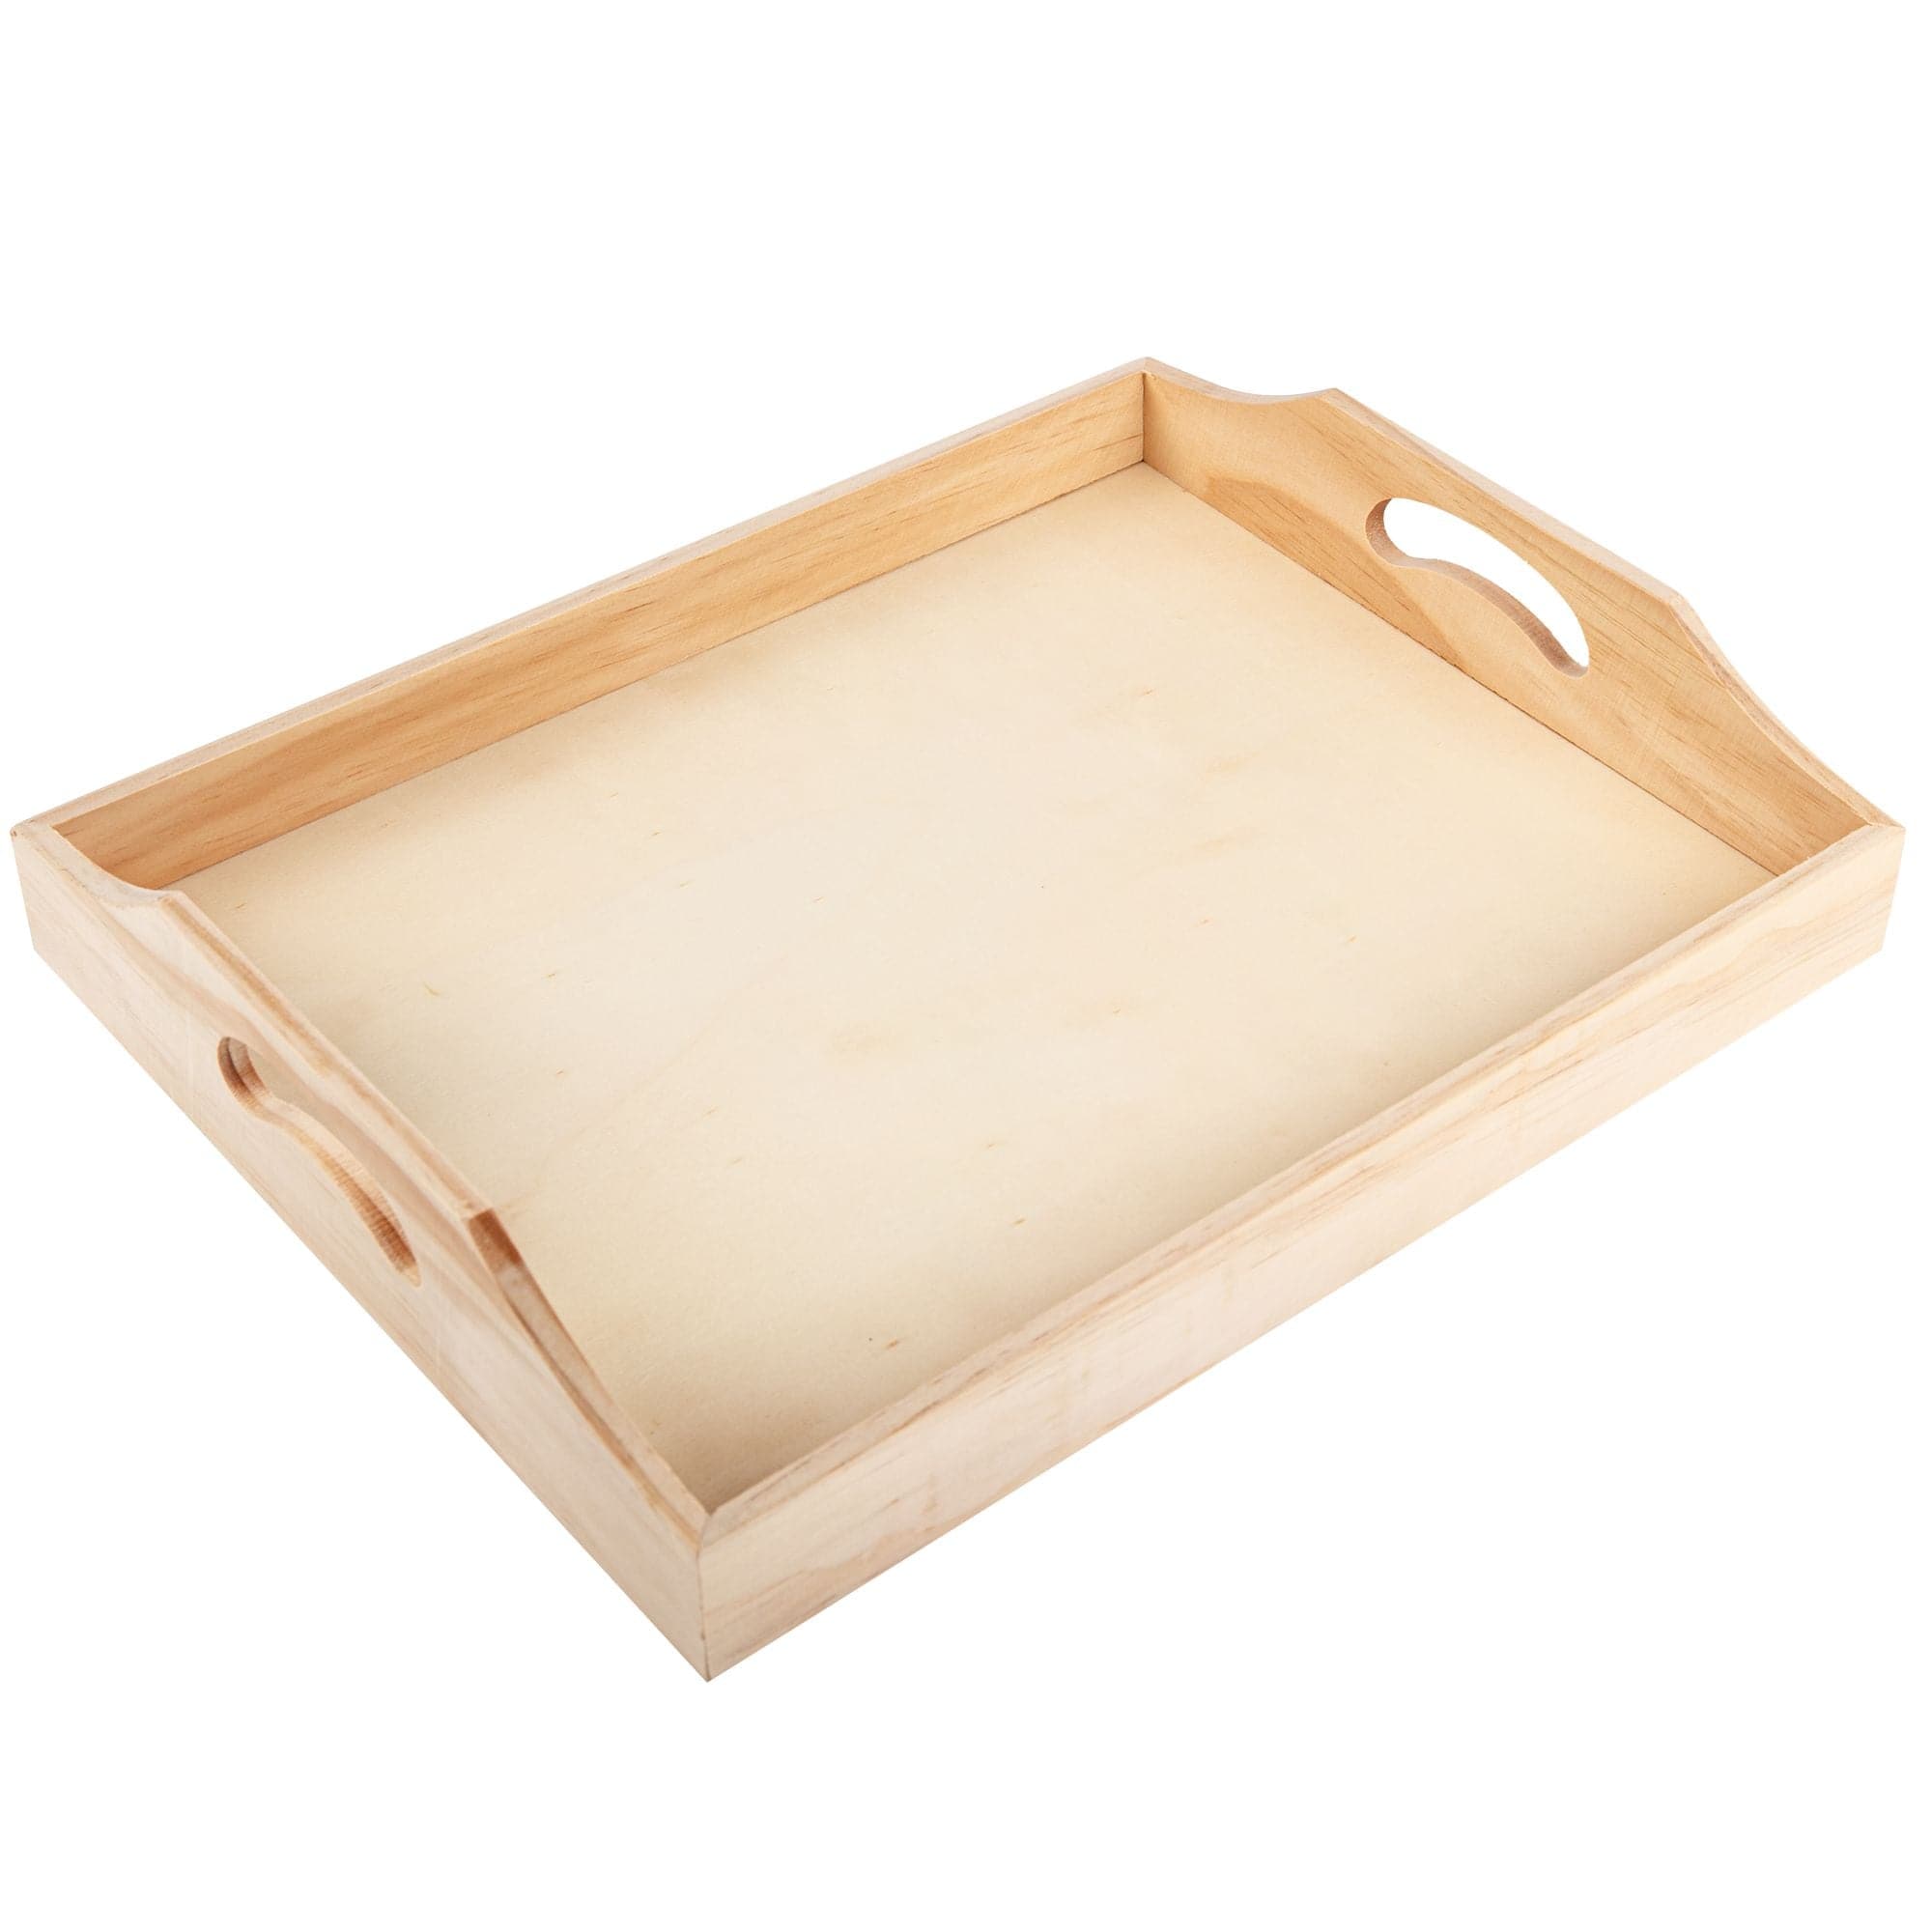 Image of Urban Crafter Rectangular Wooden Tray 35.5 x 28.6 x 6.6cm